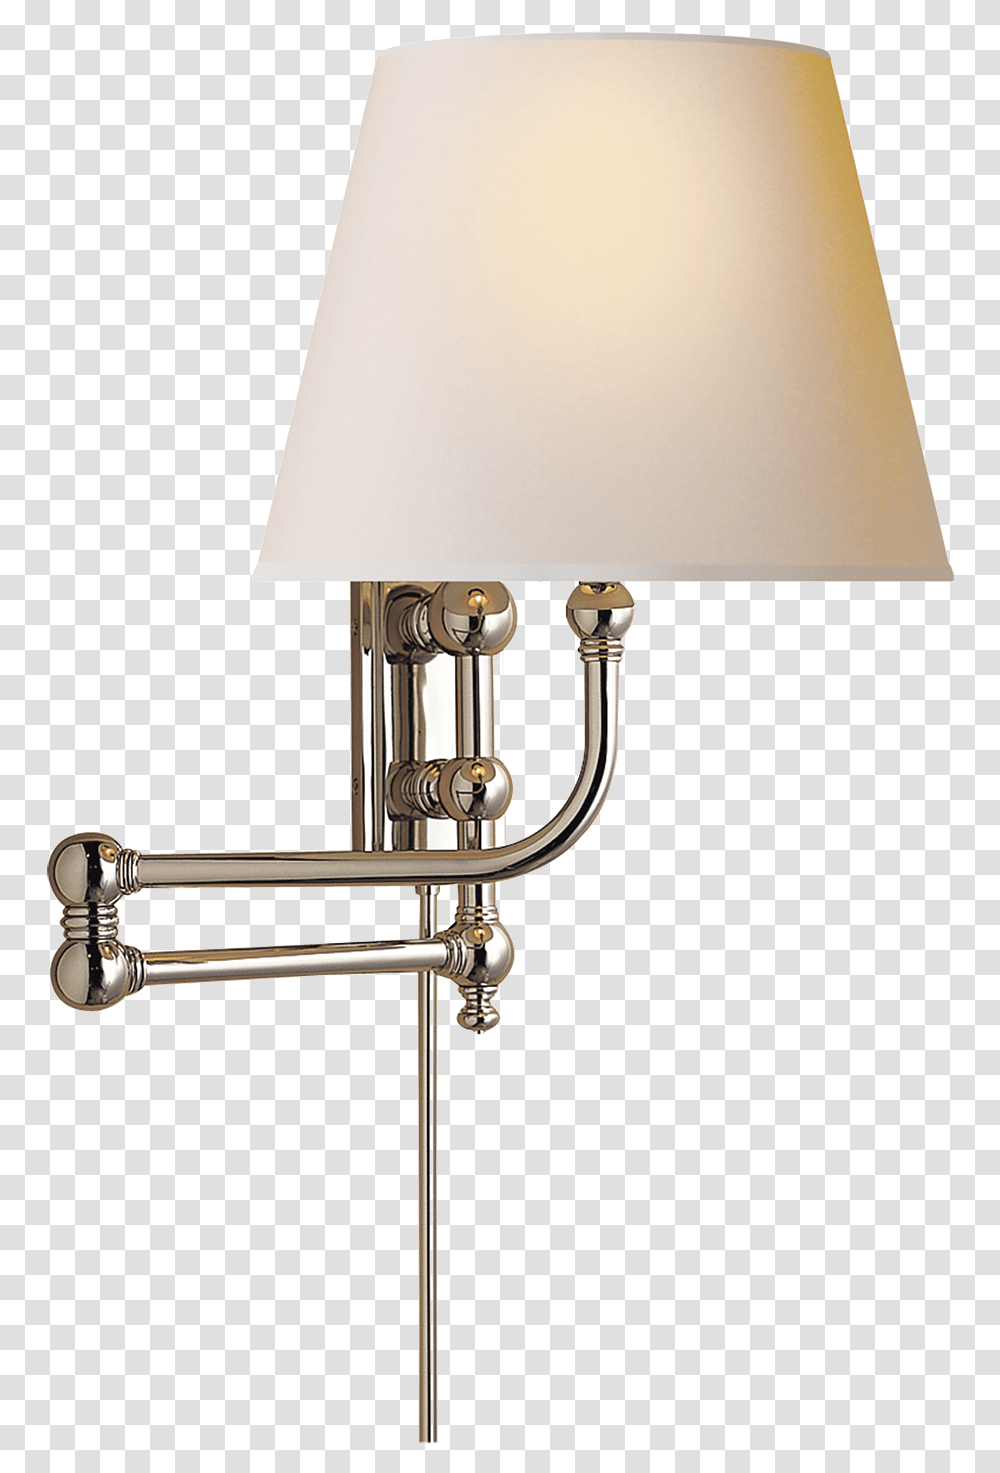 Pimlico Swing Arm Desk Lamp, Lampshade, Table Lamp, Shower Faucet Transparent Png